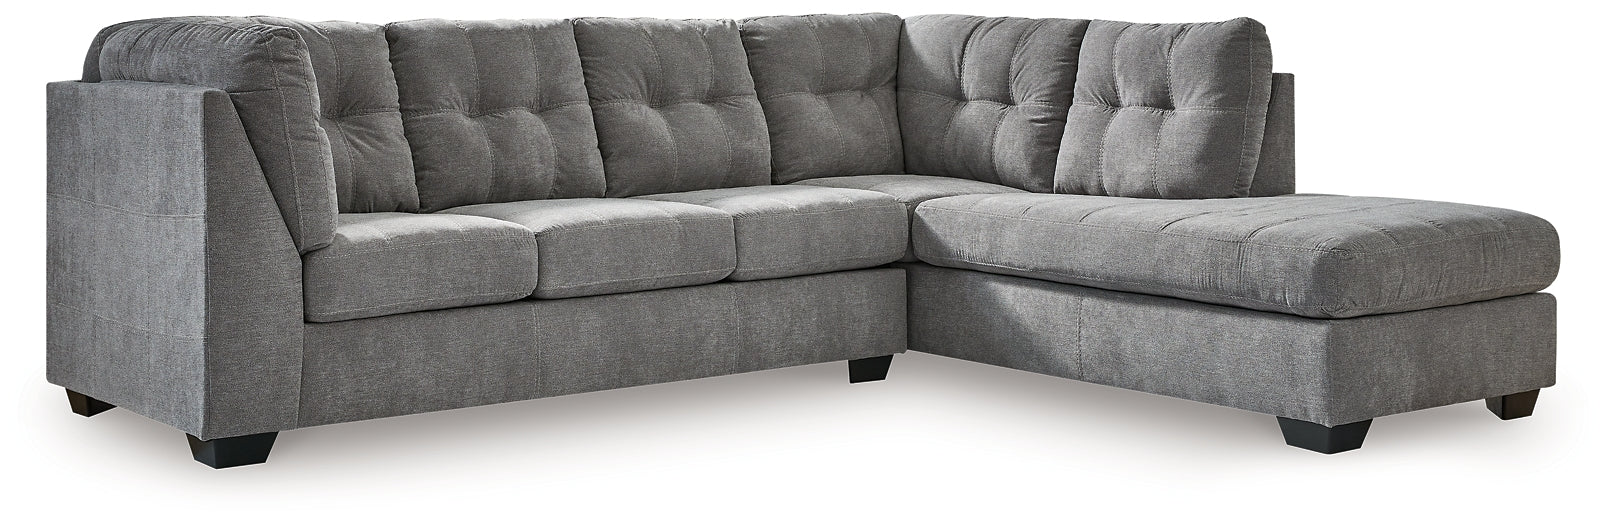 Marleton 2-Piece Sleeper Sectional with Chaise JB's Furniture  Home Furniture, Home Decor, Furniture Store